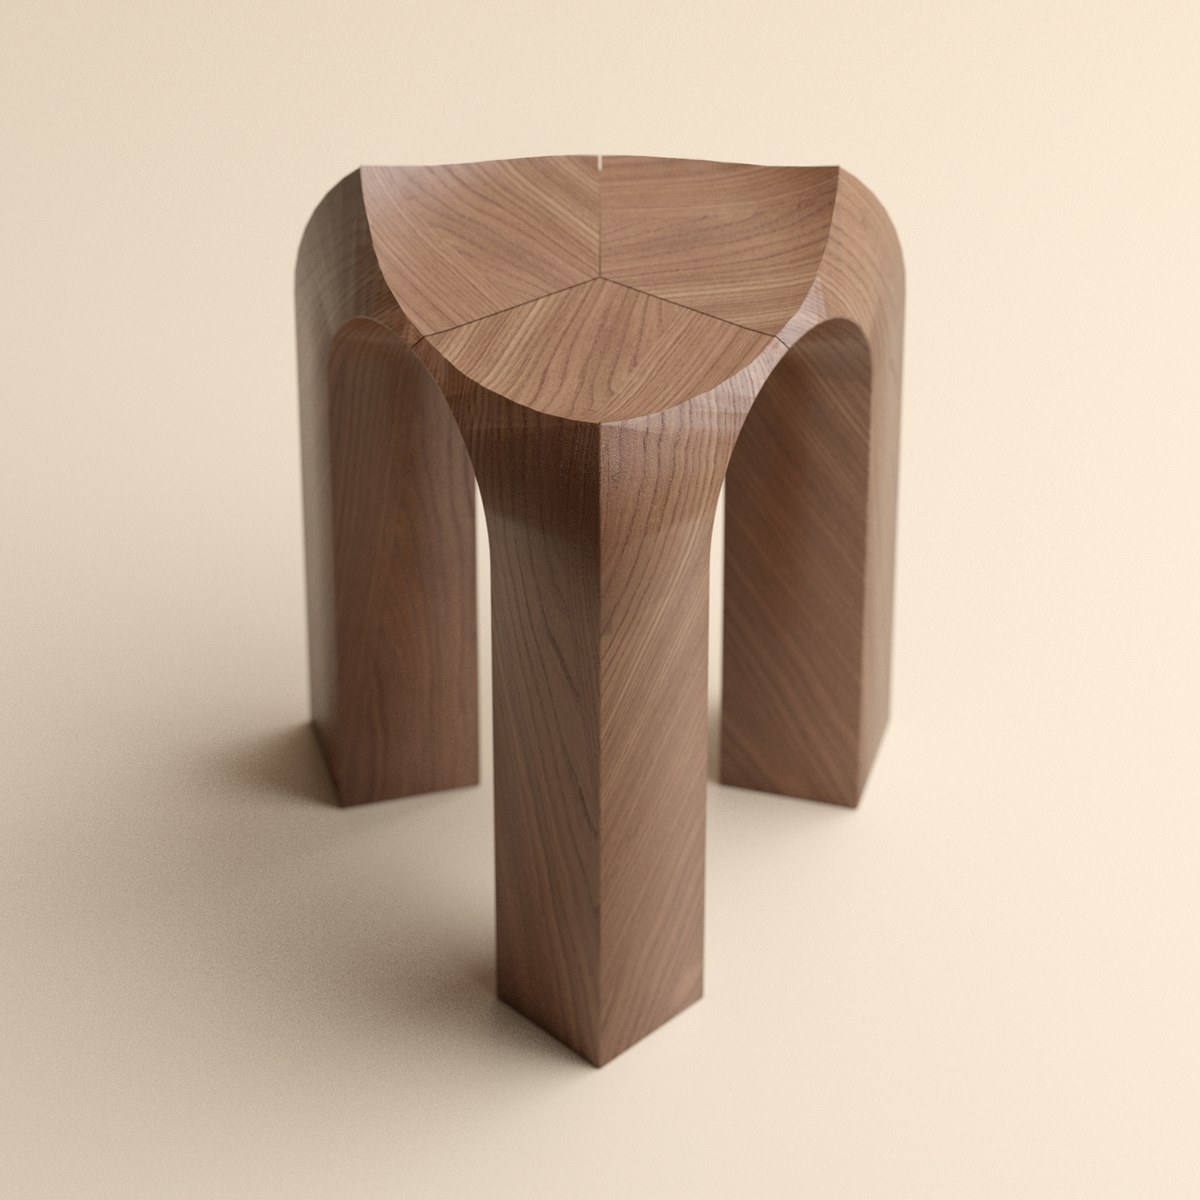 Crown Stool A Sculptural Stool Made of Durable Solid Wood